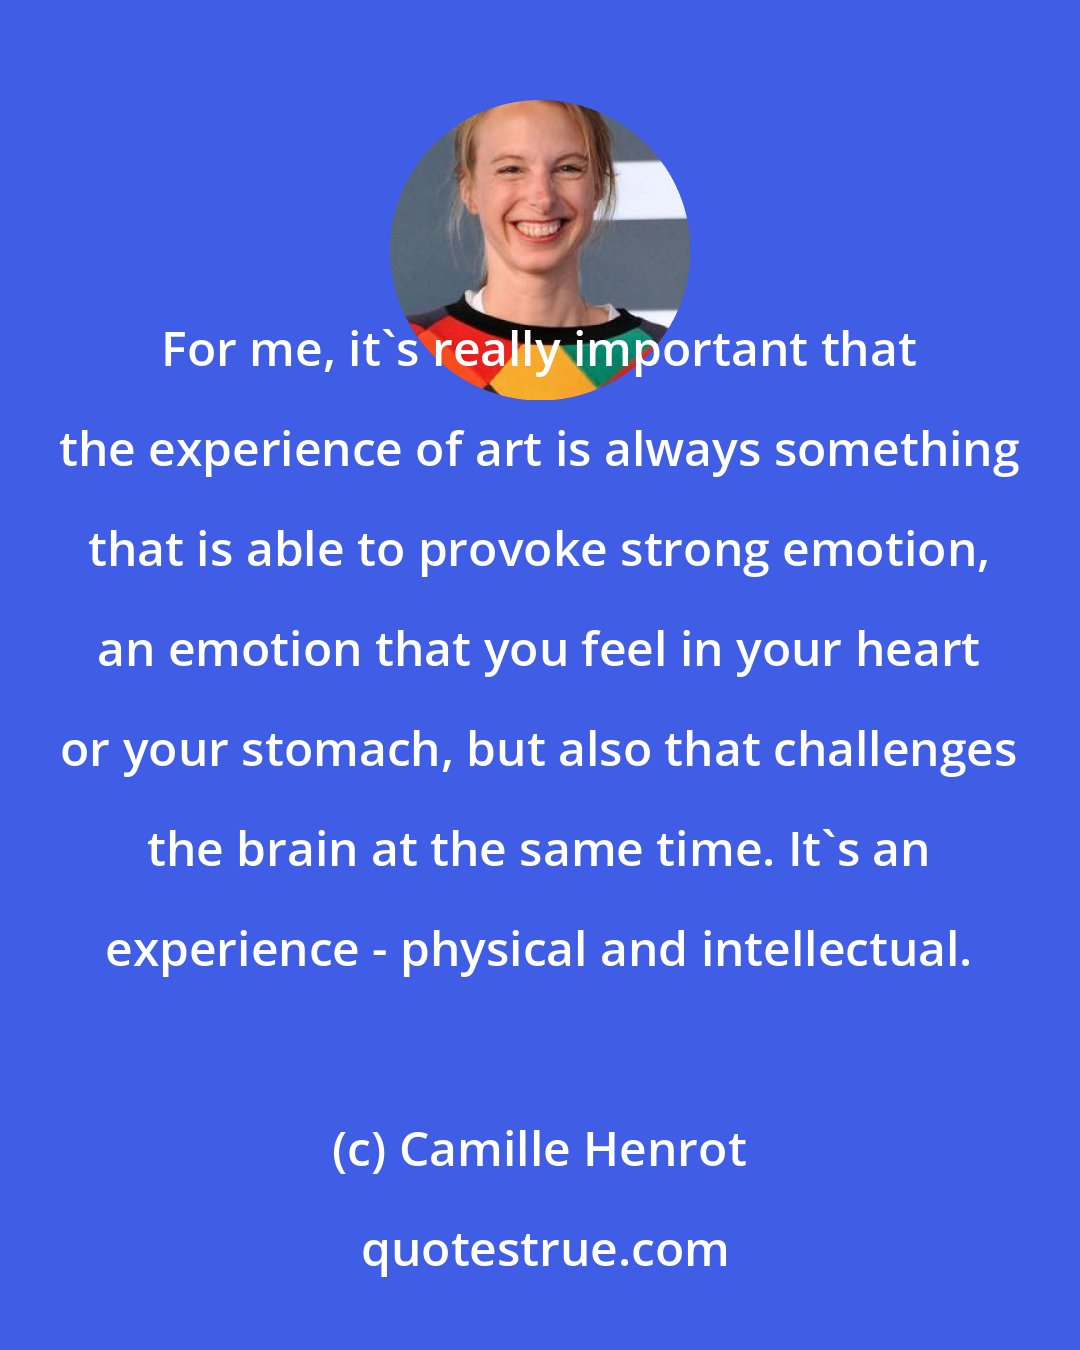 Camille Henrot: For me, it's really important that the experience of art is always something that is able to provoke strong emotion, an emotion that you feel in your heart or your stomach, but also that challenges the brain at the same time. It's an experience - physical and intellectual.